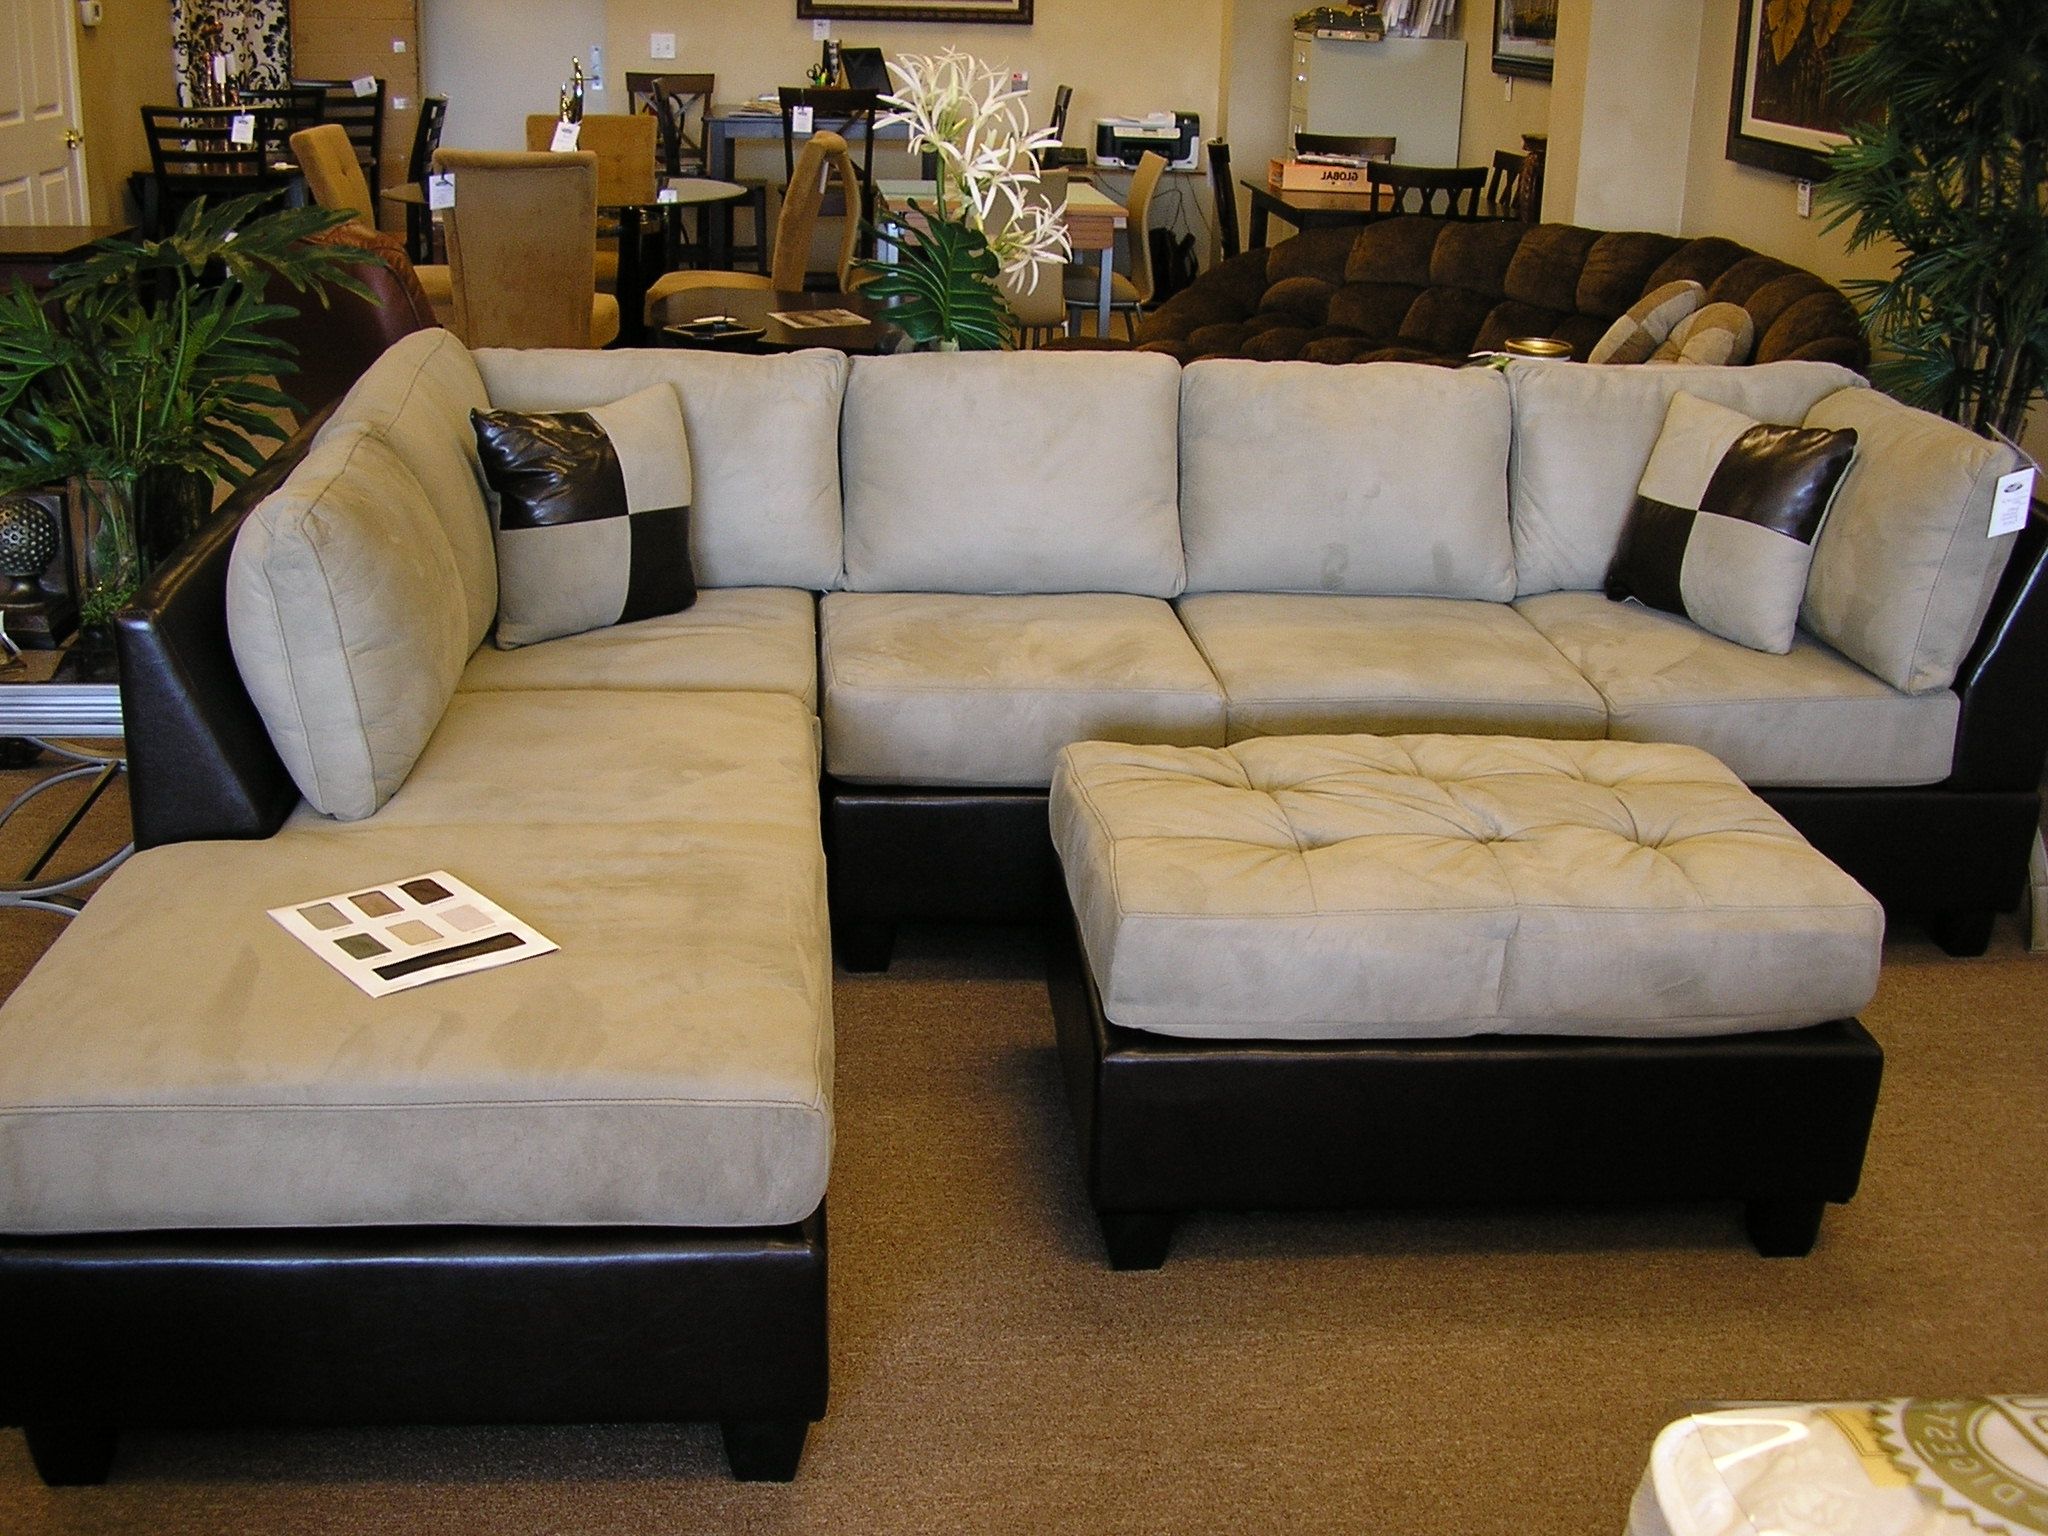 Sectional Sofa Design: Beautiful Sectional Sofas With Chaise For Most Up To Date Sectionals With Reversible Chaise (View 5 of 15)